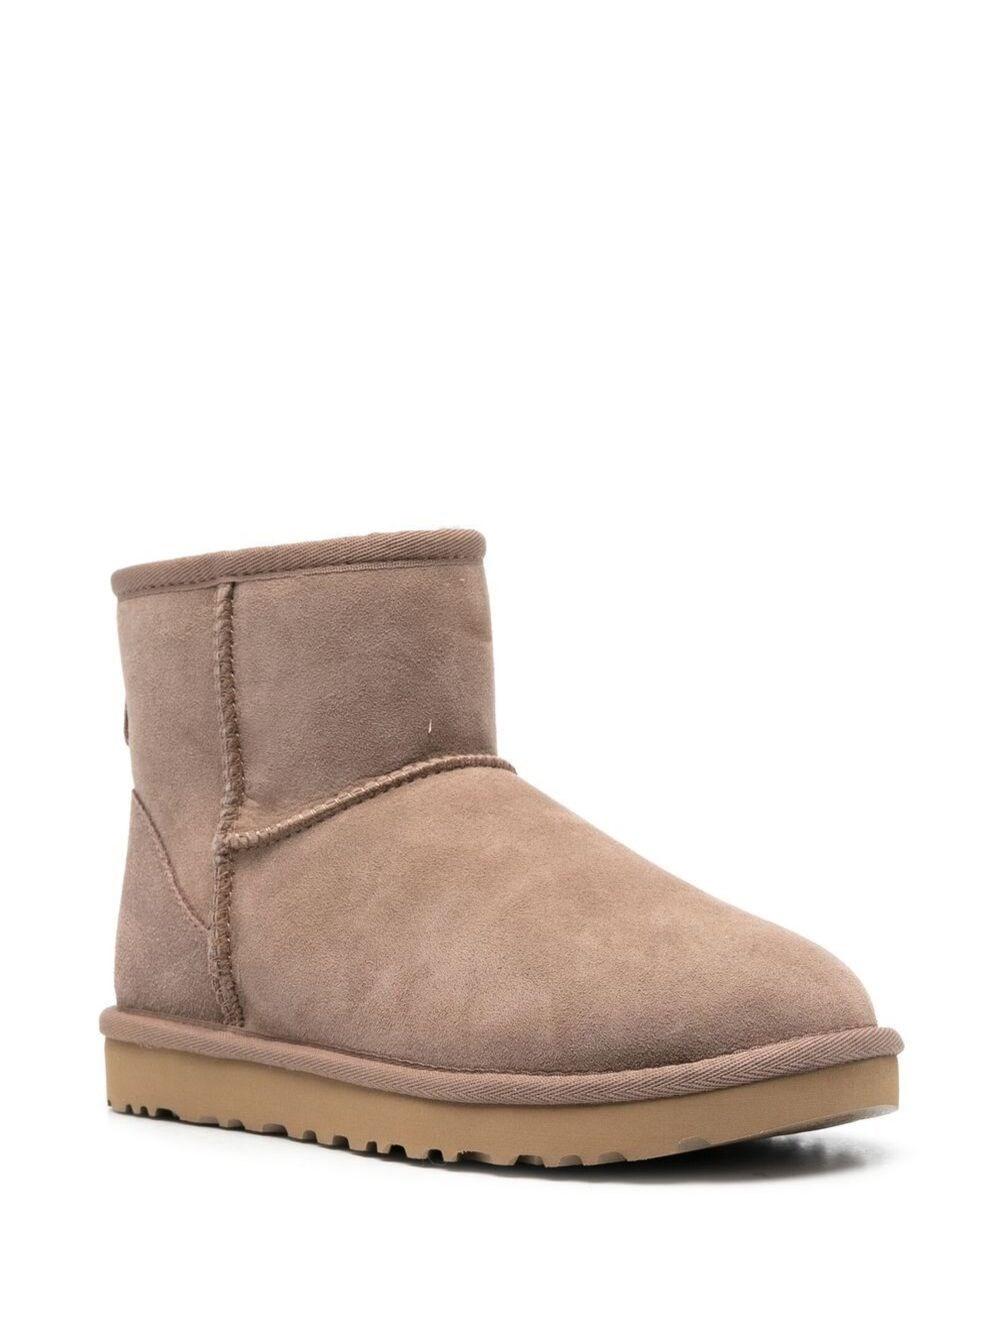 UGG Beige Ankle Boots In Reverse Mutton With Treadlite Flat Sole By Tm in  Brown | Lyst